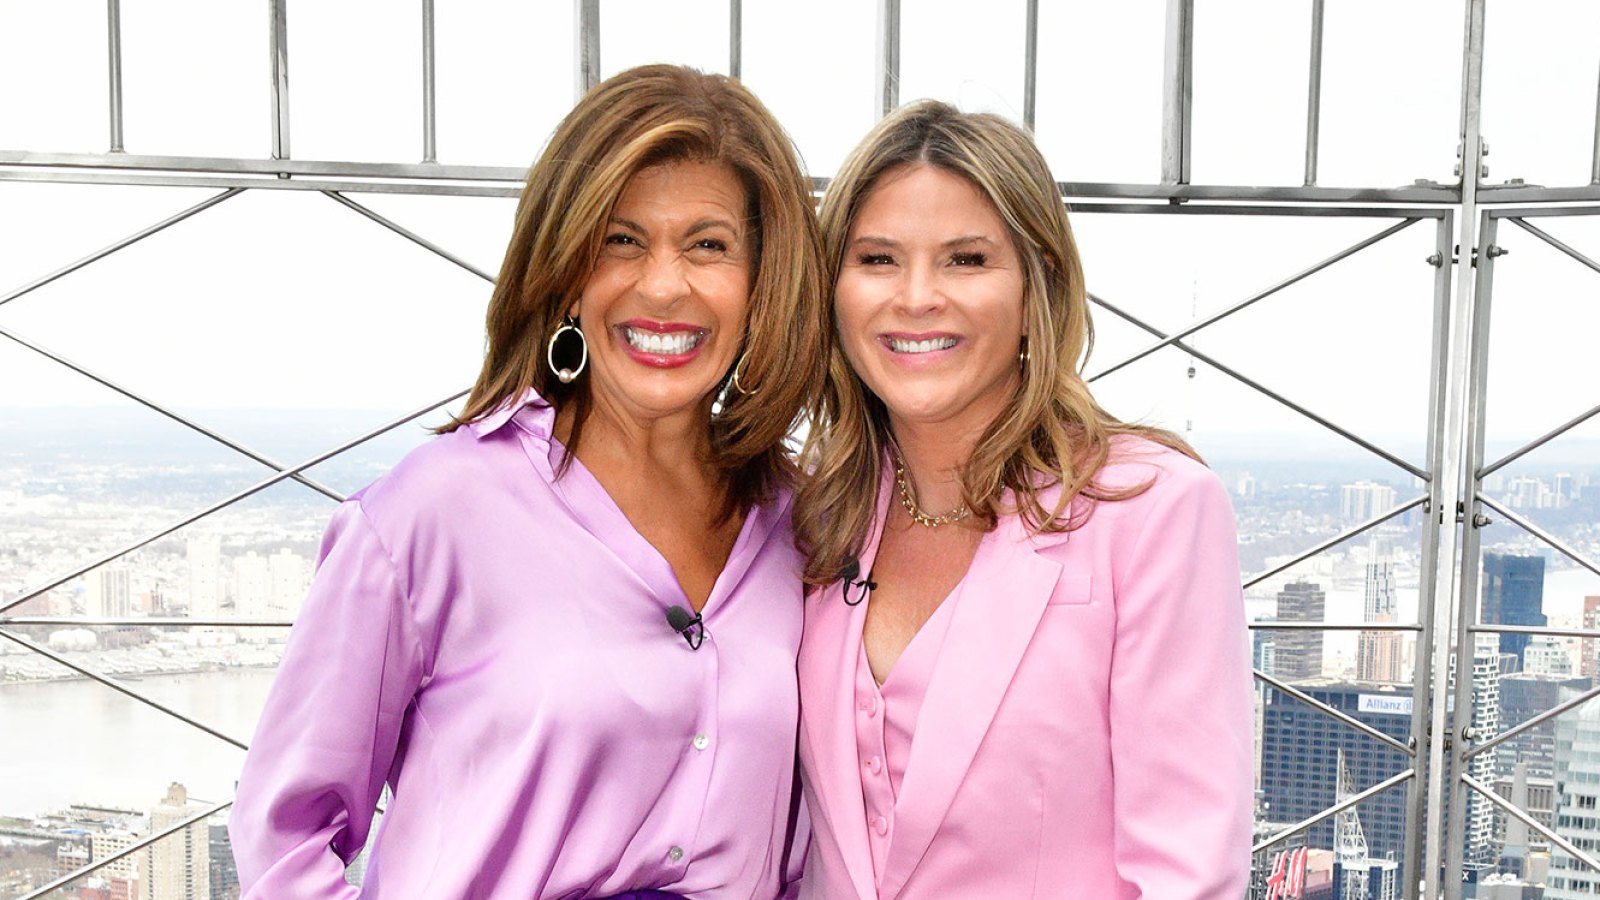 Feature Hoda Kotb and Jenna Bush Hager Celebrate 5 Years Cohosting Today Together Empire State Building